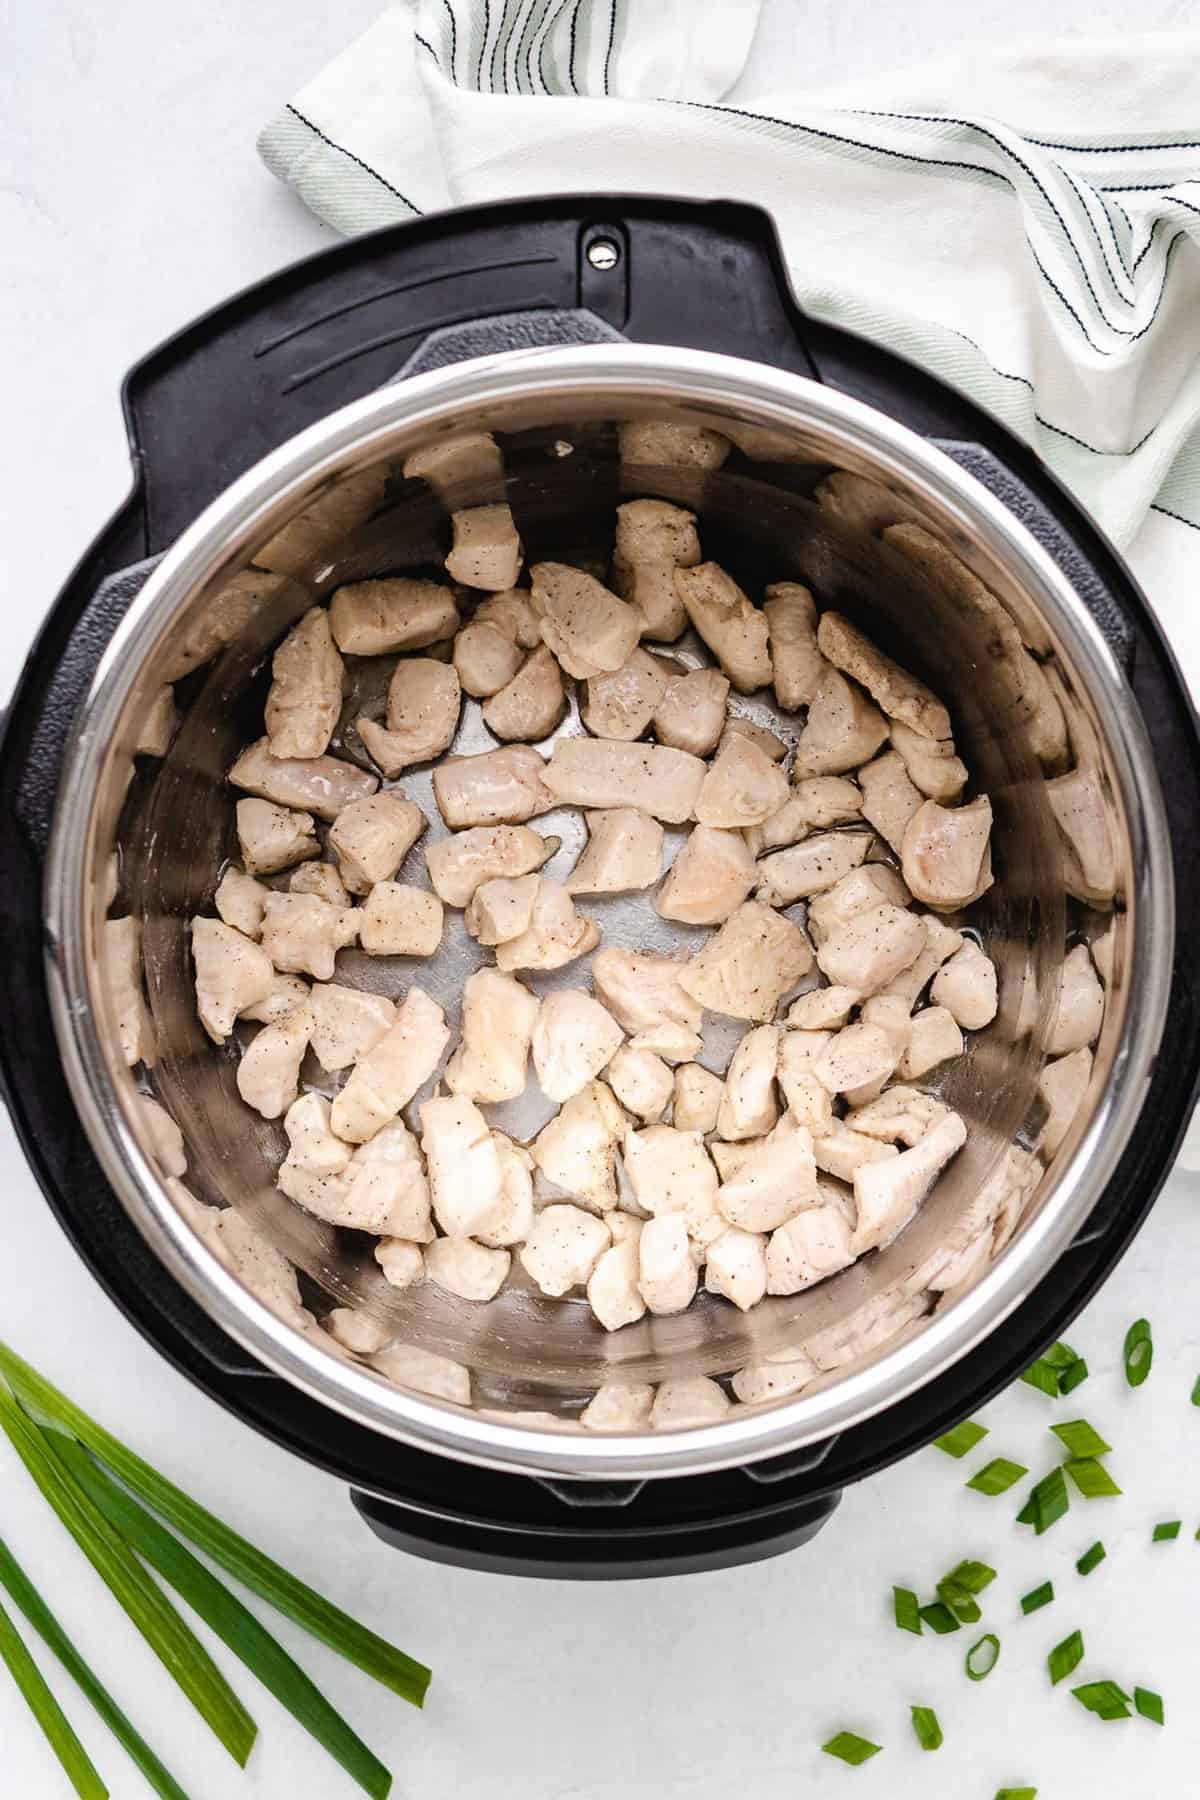 Cubes of cooked chicken in an instant pot.